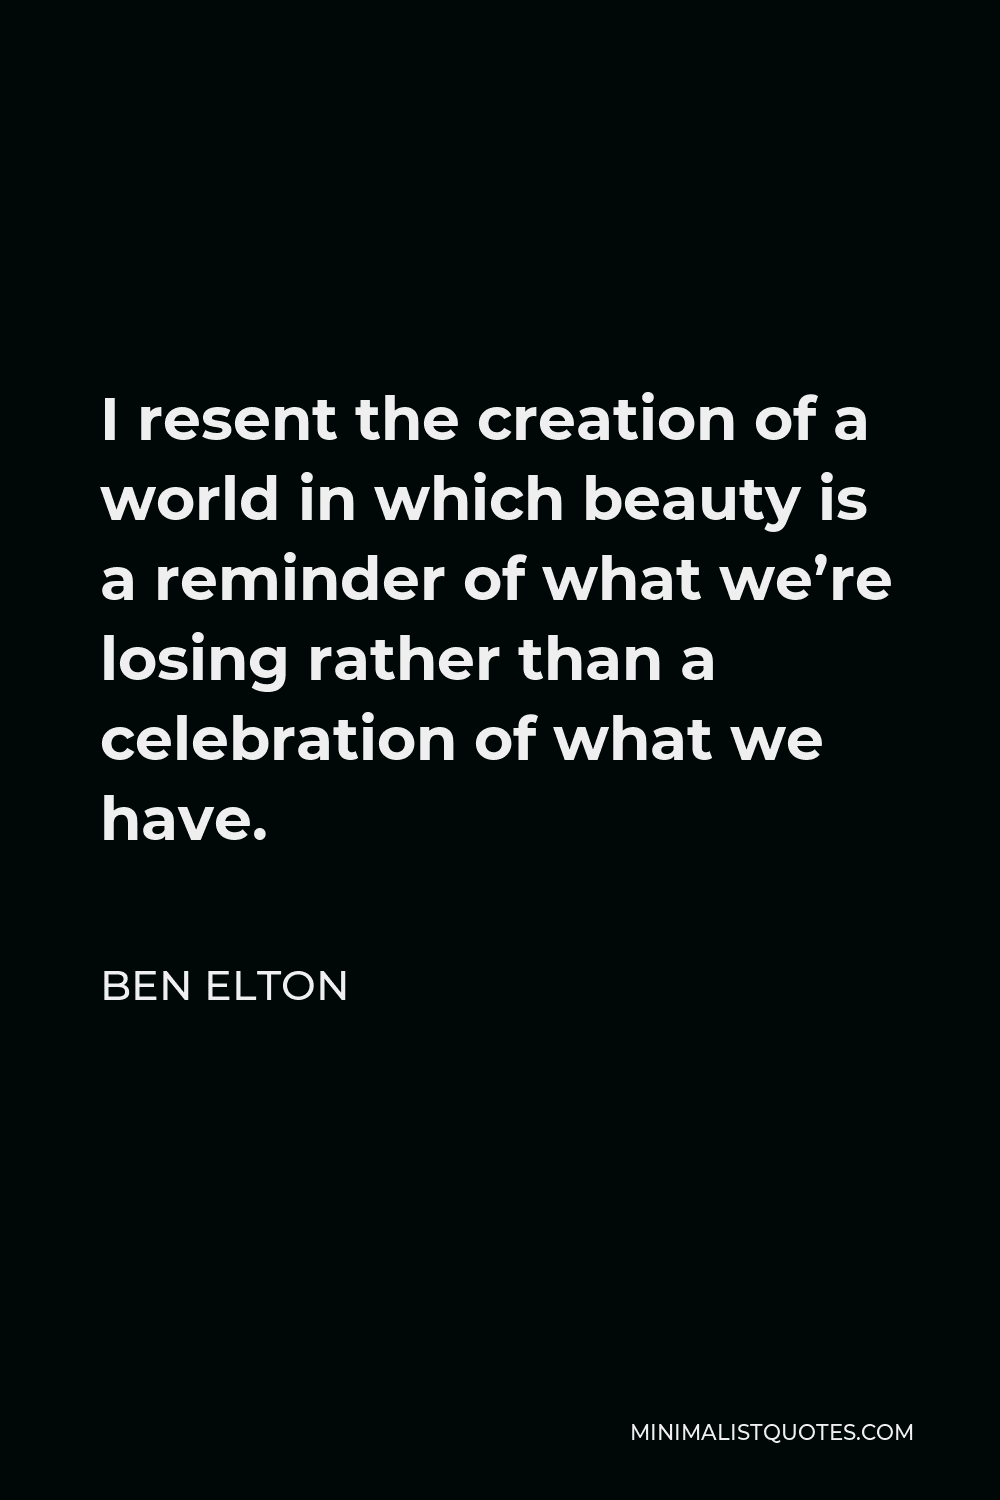 Ben Elton Quote - I resent the creation of a world in which beauty is a reminder of what we’re losing rather than a celebration of what we have.